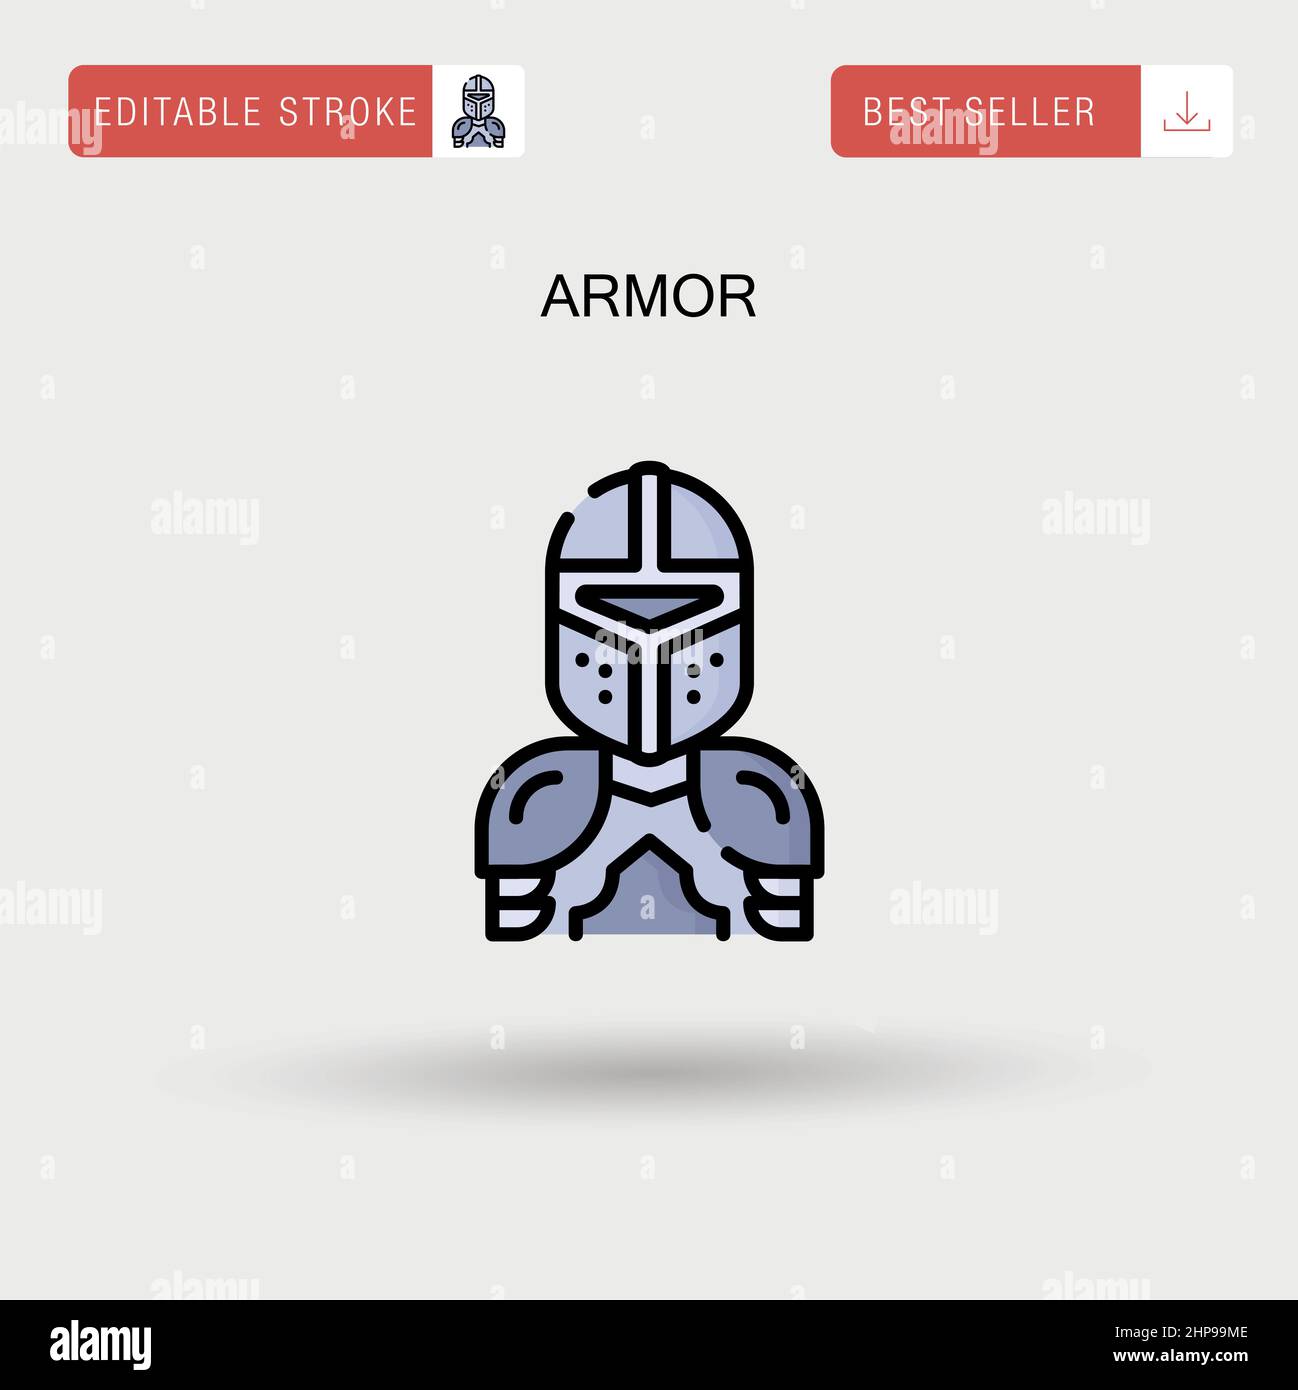 Armor Stock Vector Images - Alamy